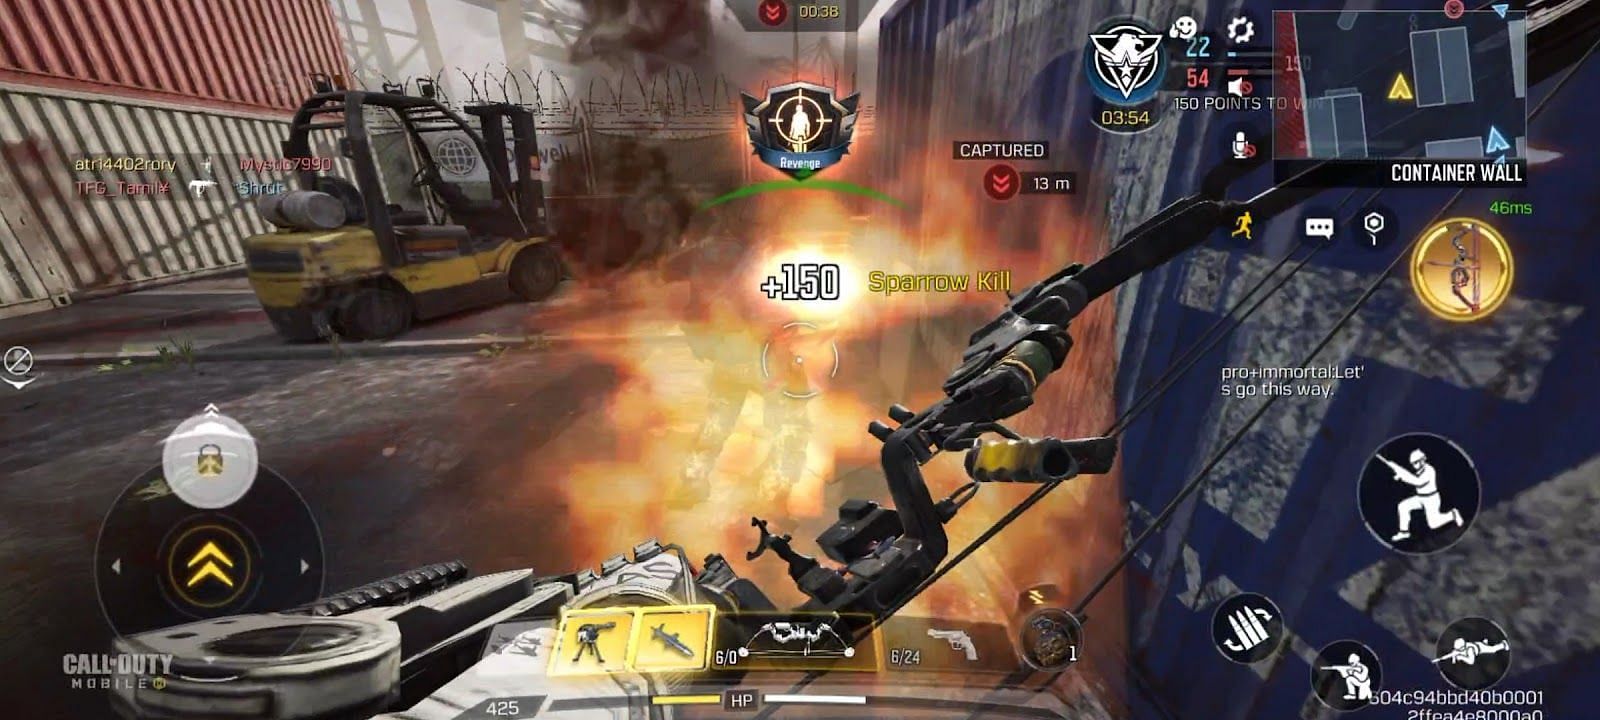 Call of Duty: Mobile features an immersive FPS gameplay (Image via Activision)